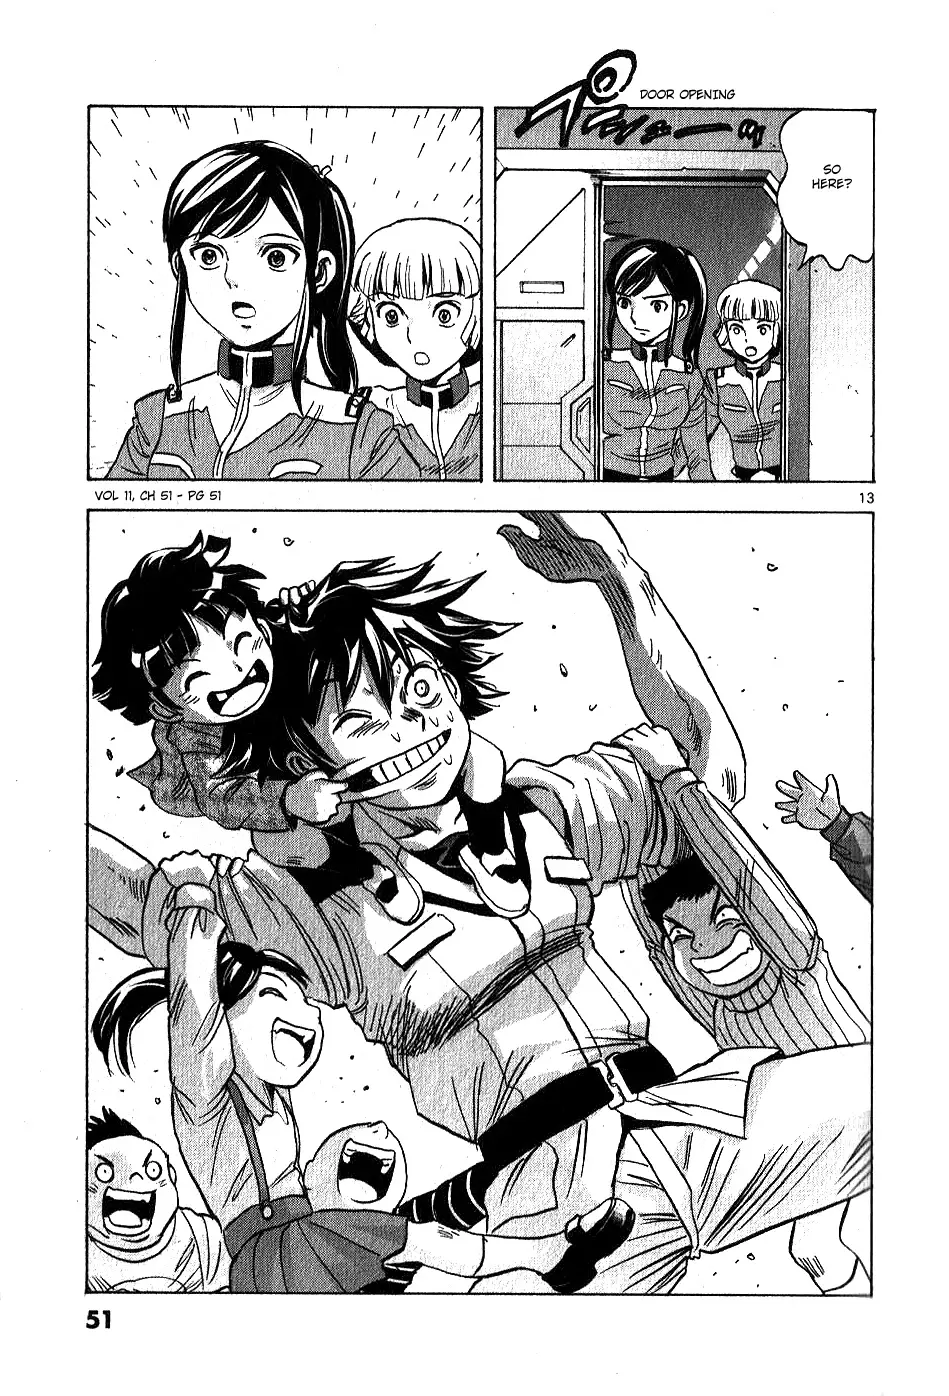 Mobile Suit Gundam Aggressor - 51 page 13-17ee2aa3